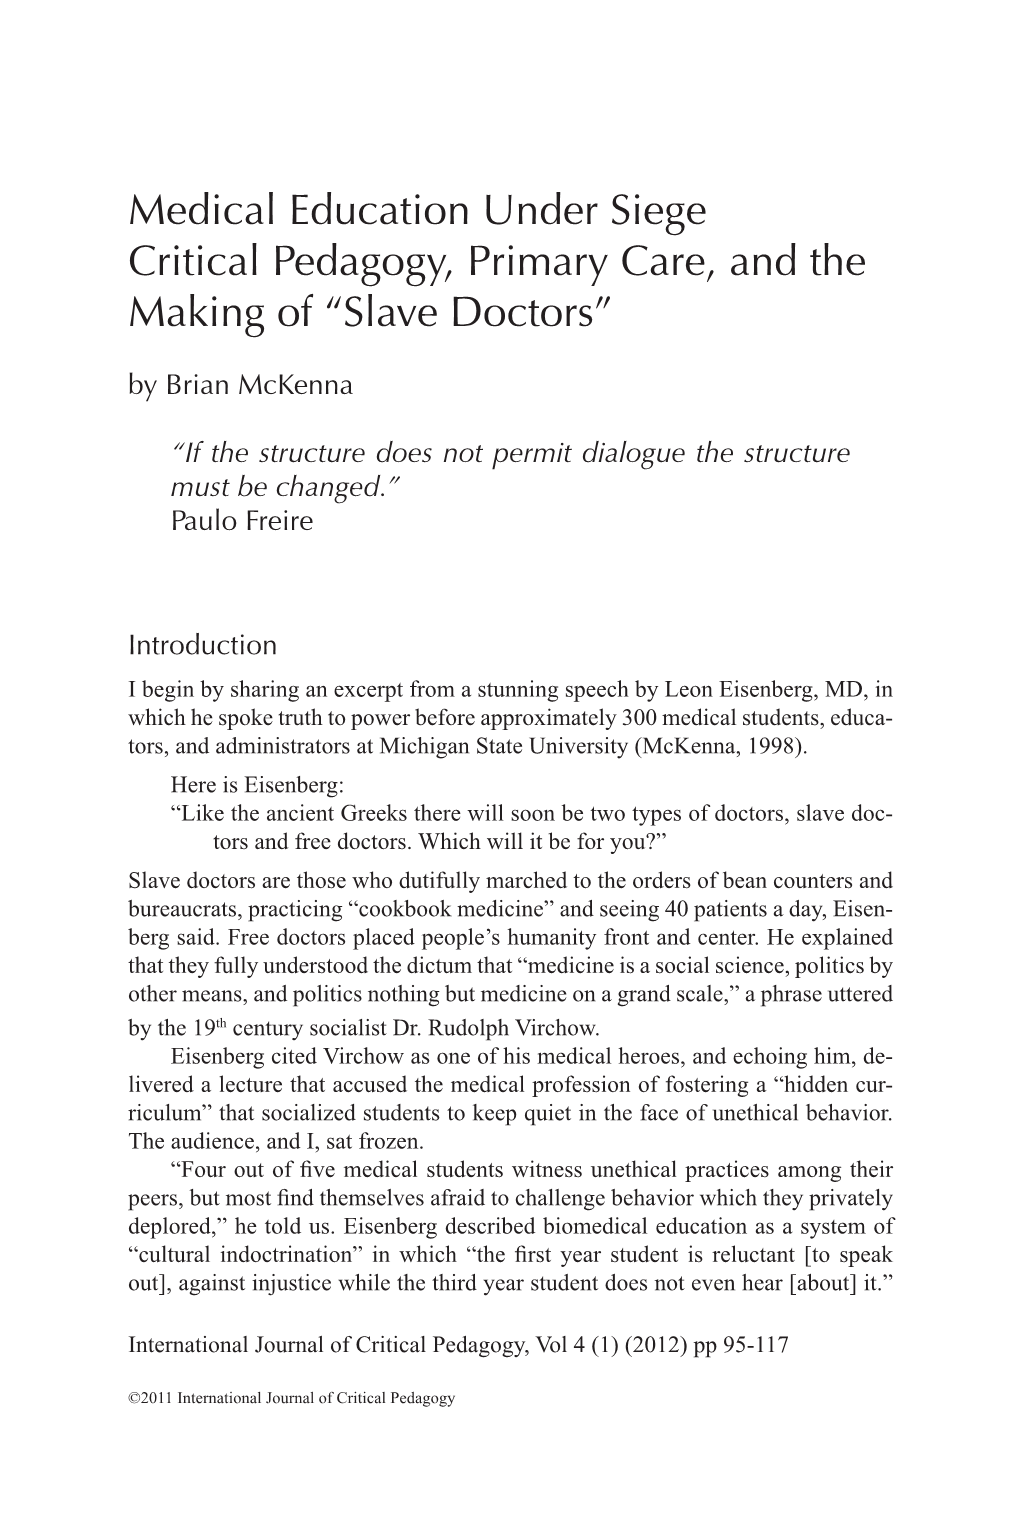 Medical Education Under Siege Critical Pedagogy, Primary Care, and the Making of “Slave Doctors” by Brian Mckenna